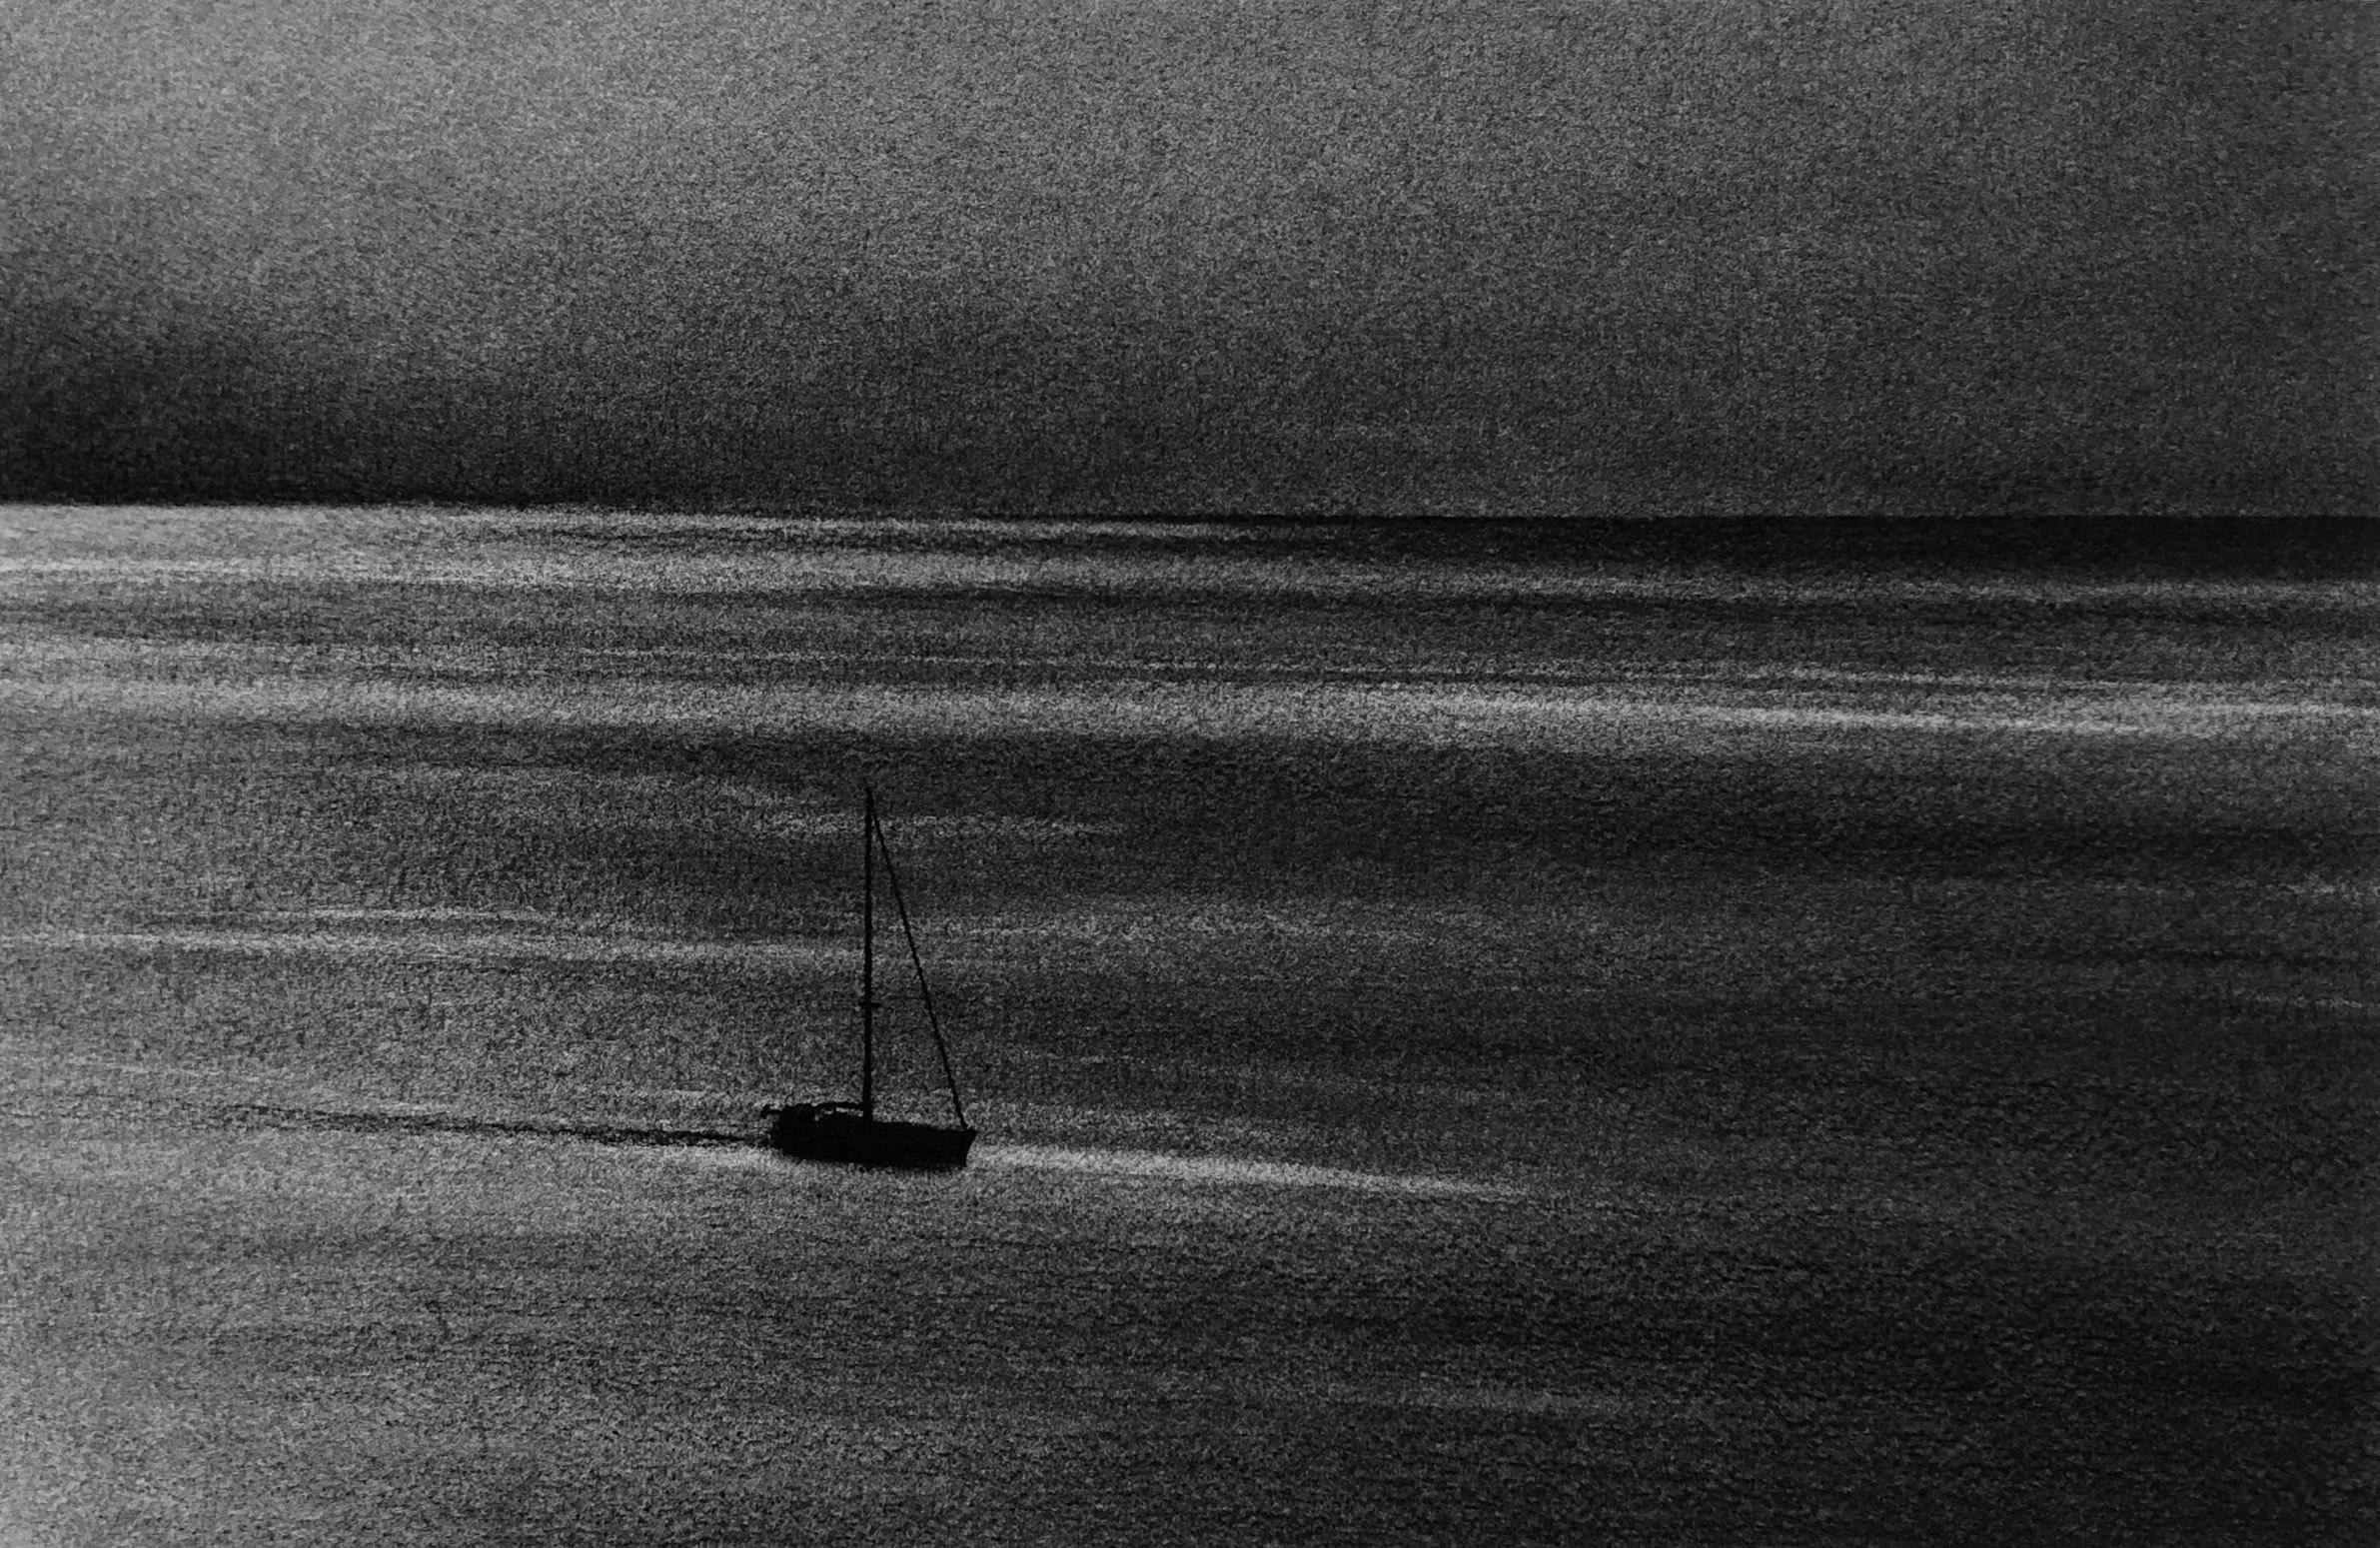 Katherine Curci Landscape Art - Vancouver Sail, black and white charcoal drawing of boat on the ocean